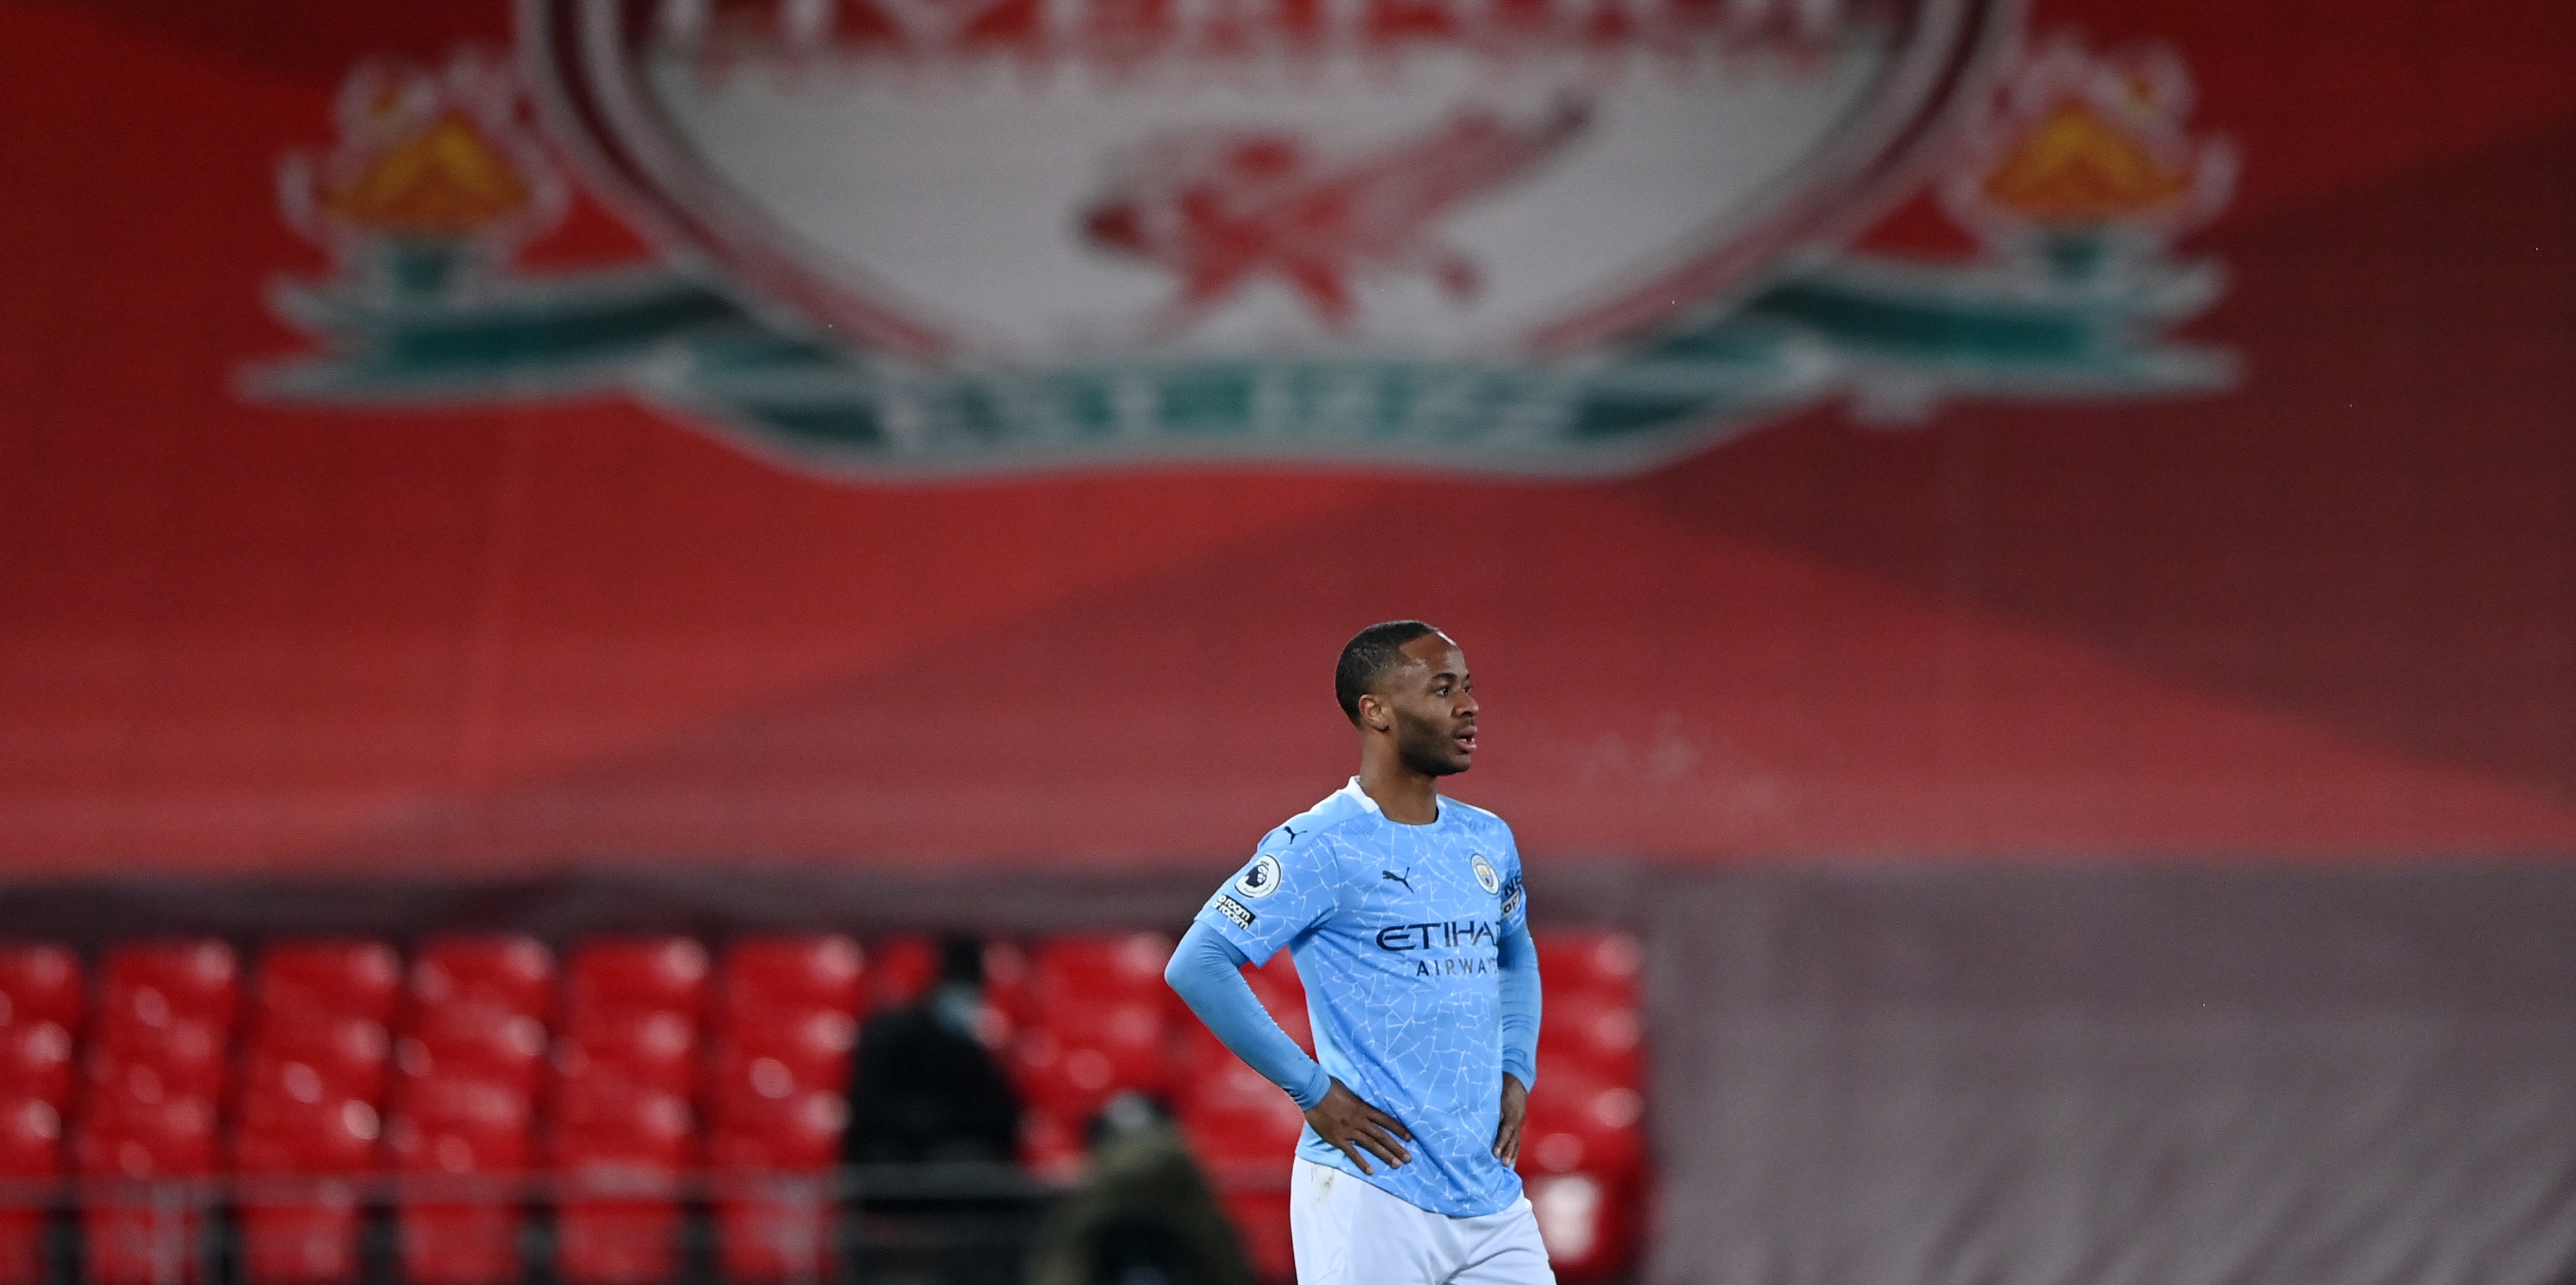 ‘It does my head in’ – Rio Ferdinand fires passionate message at Liverpool fans who he claims have ‘ridiculed’ Raheem Sterling